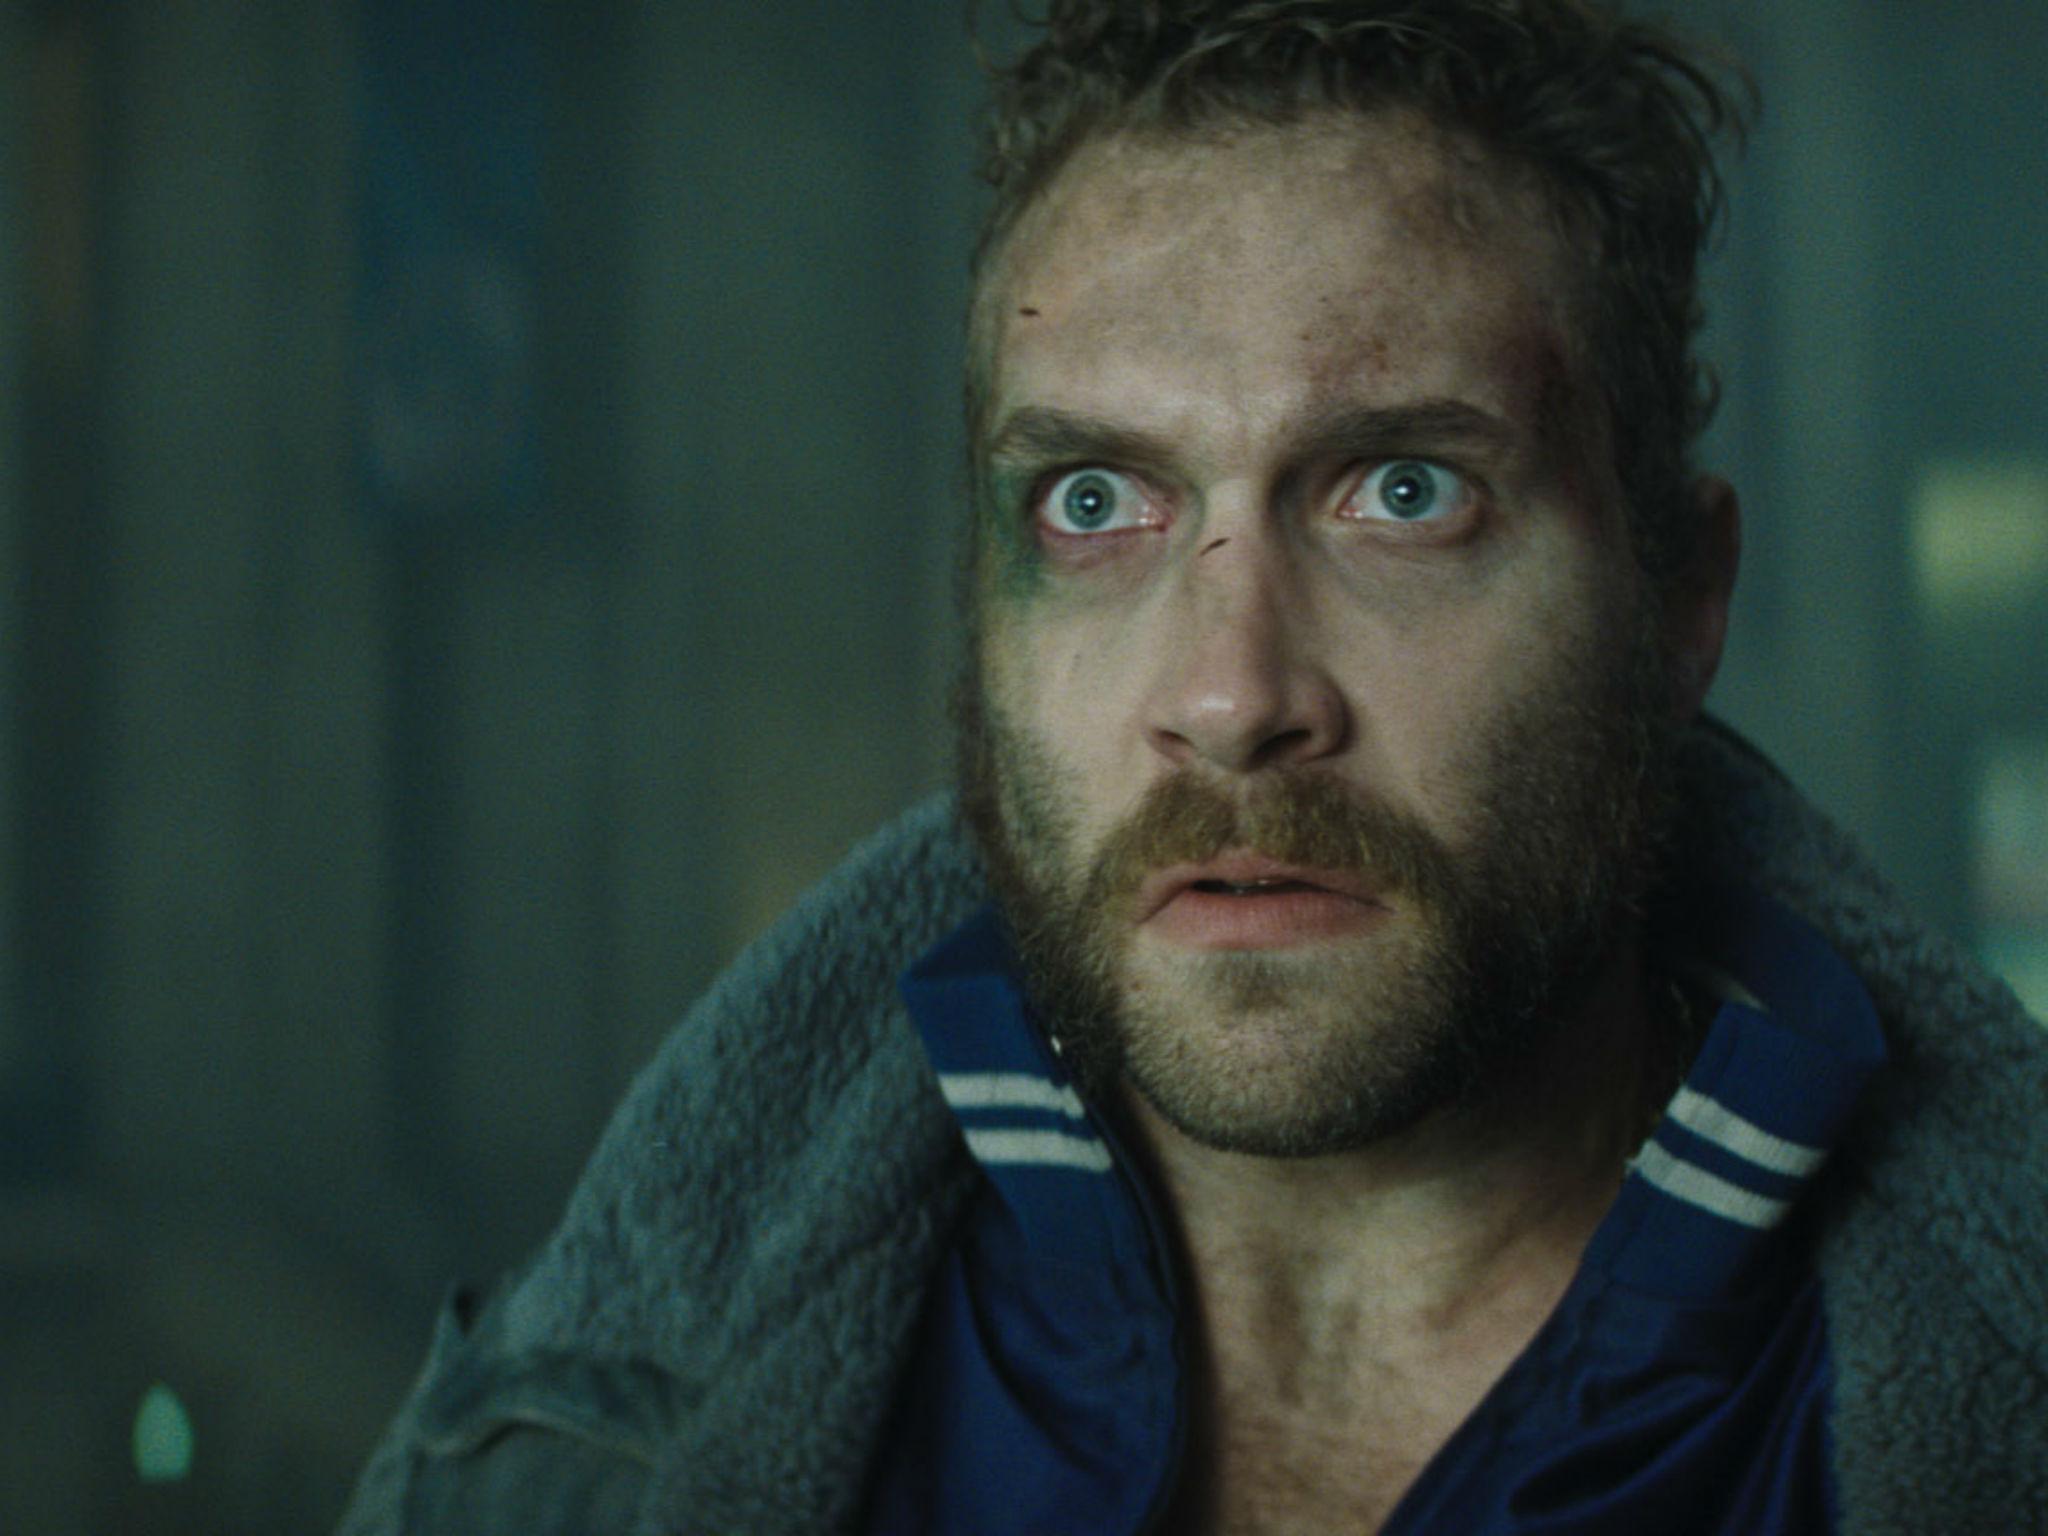 Suicide Squad: A naked Jai Courtney chased his director Terminator